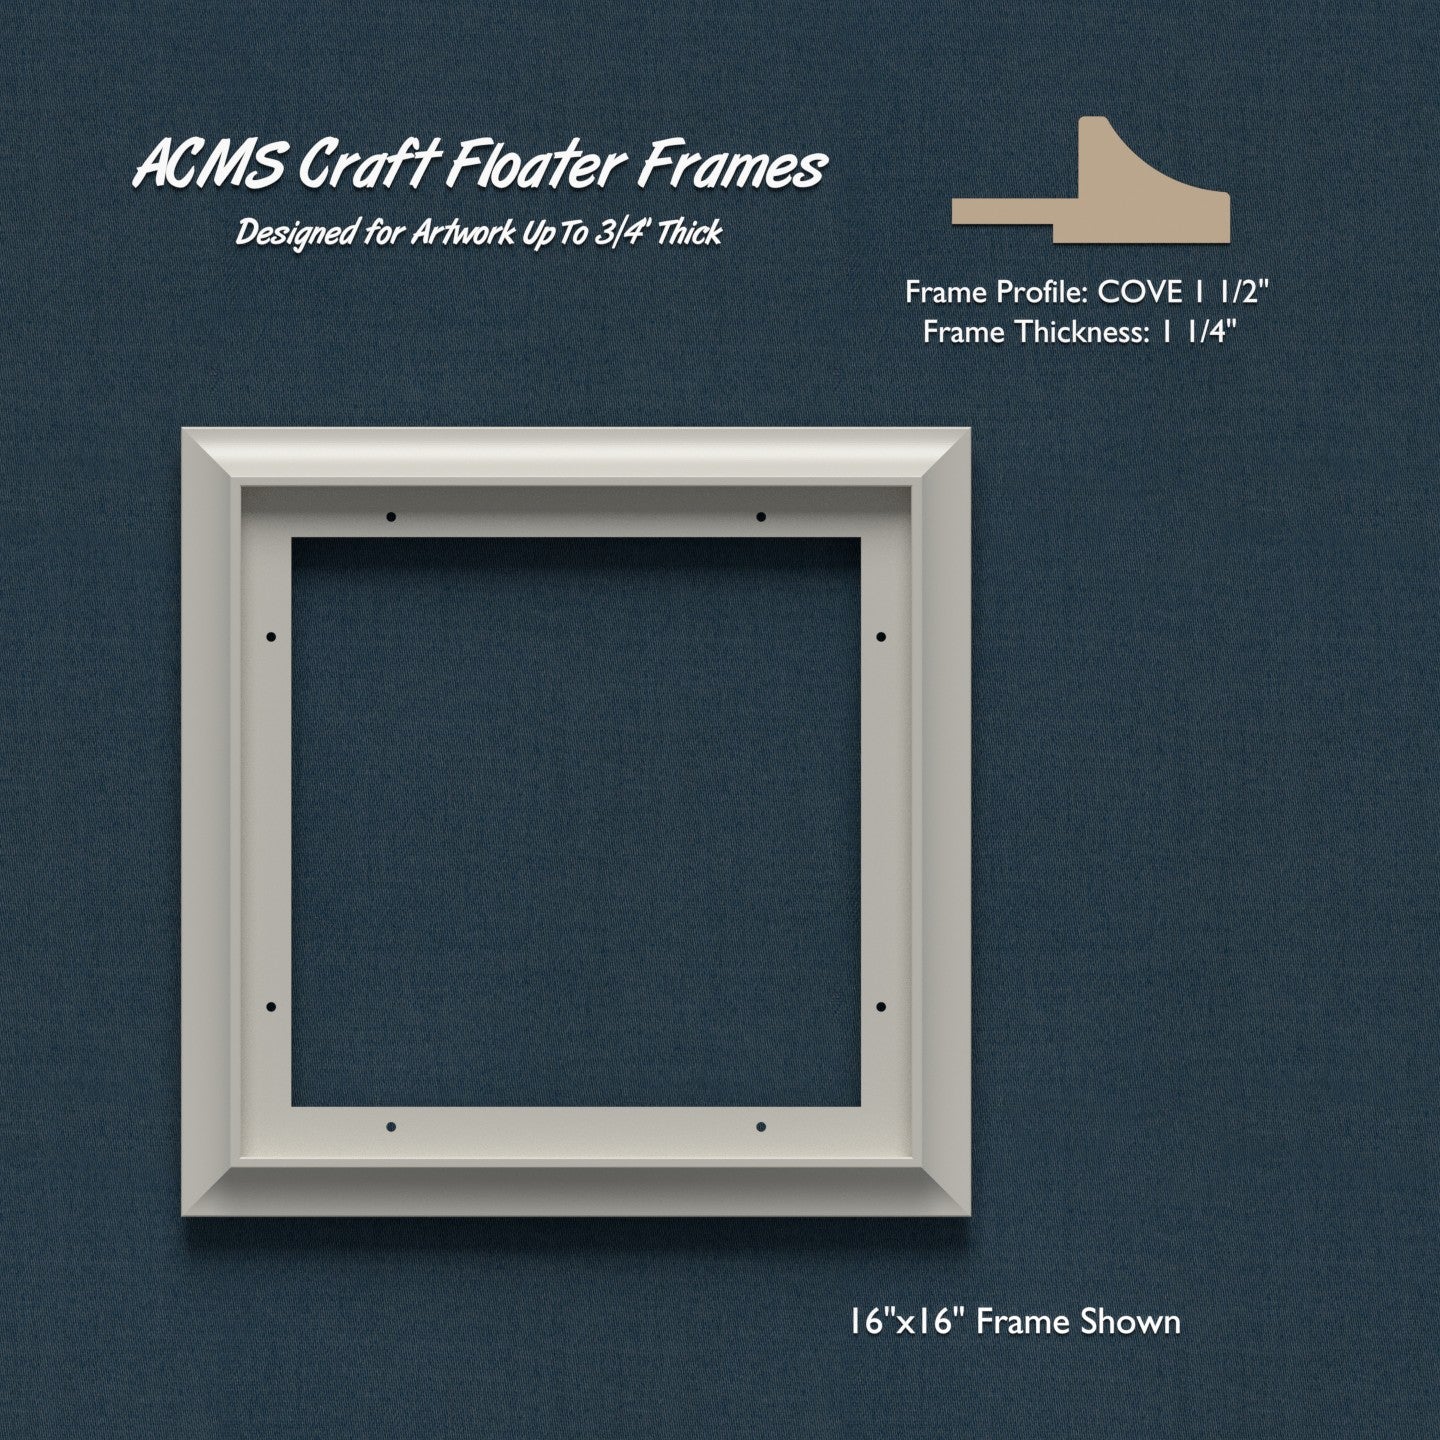 Square Craft Floater Frame - COVE 1 1/2" Profile - 1 1/4" Thick